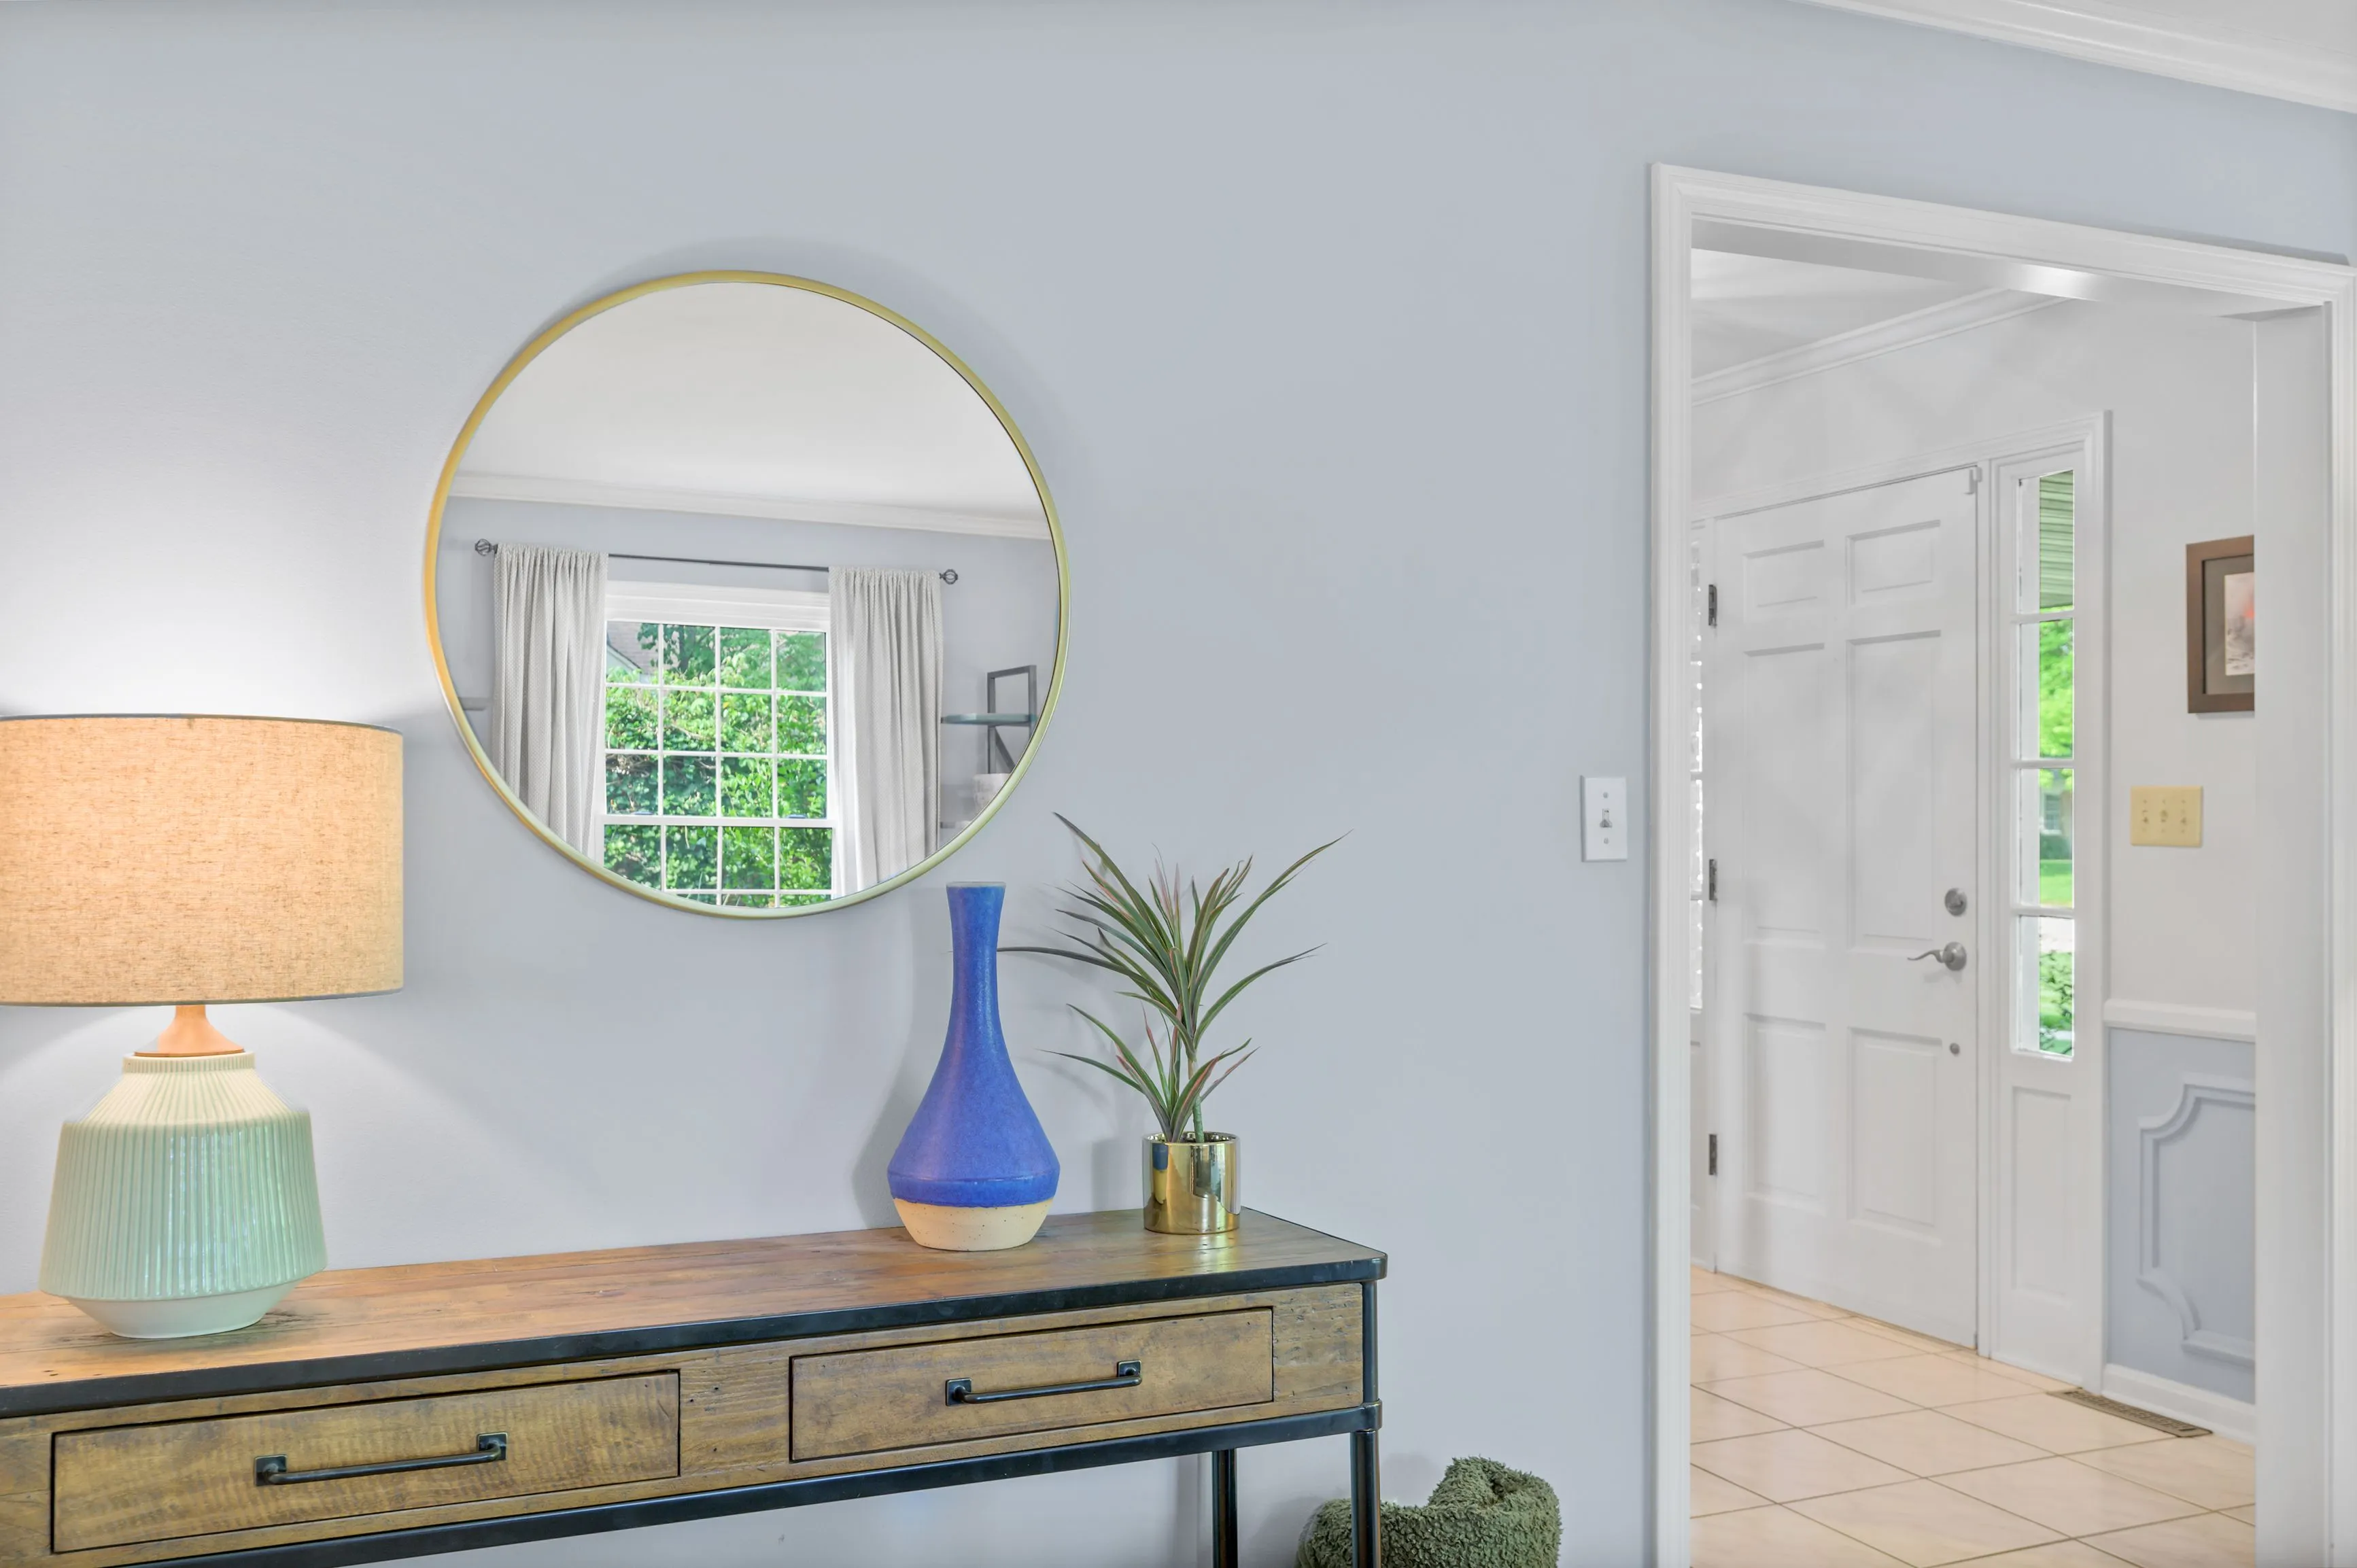 A bright entryway featuring a round mirror above a console table with a lamp and vase, with a view into another room through an open door.